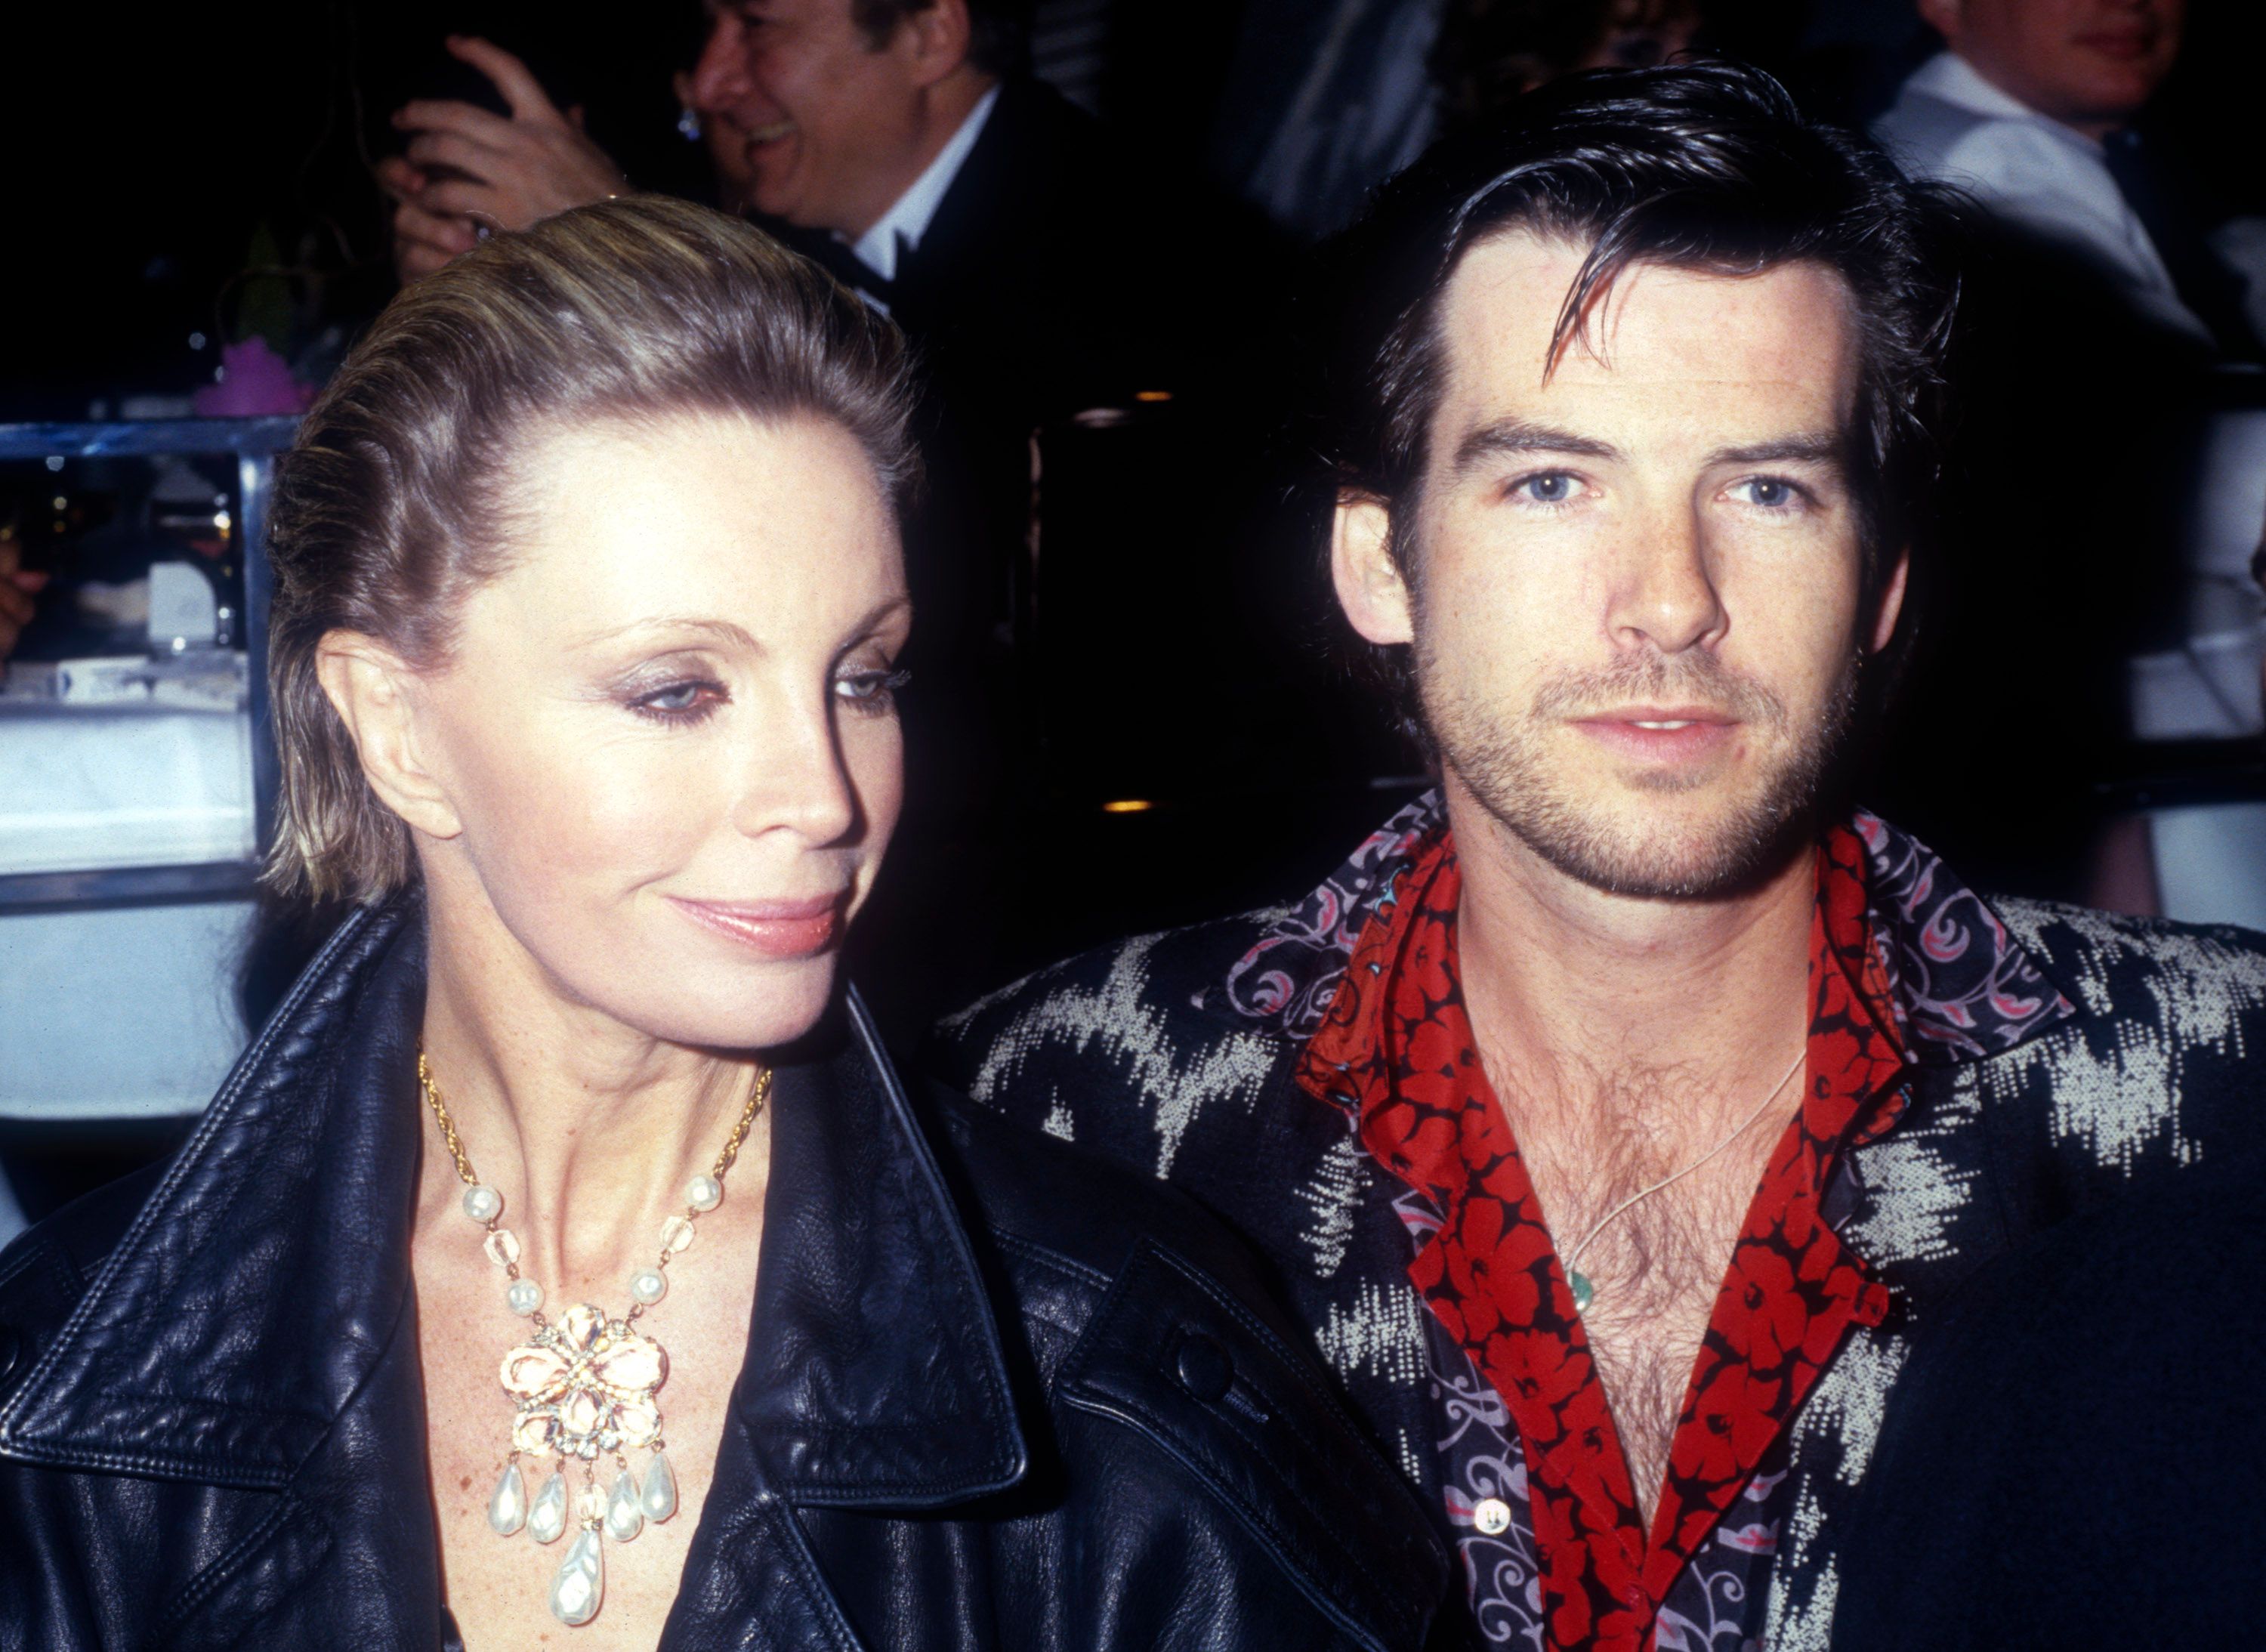 Pierce Brosnan and his now-late wife Cassandra Harris at the opening night party at Stringfellow's in 1986 in New York City. | Photo: Getty Images